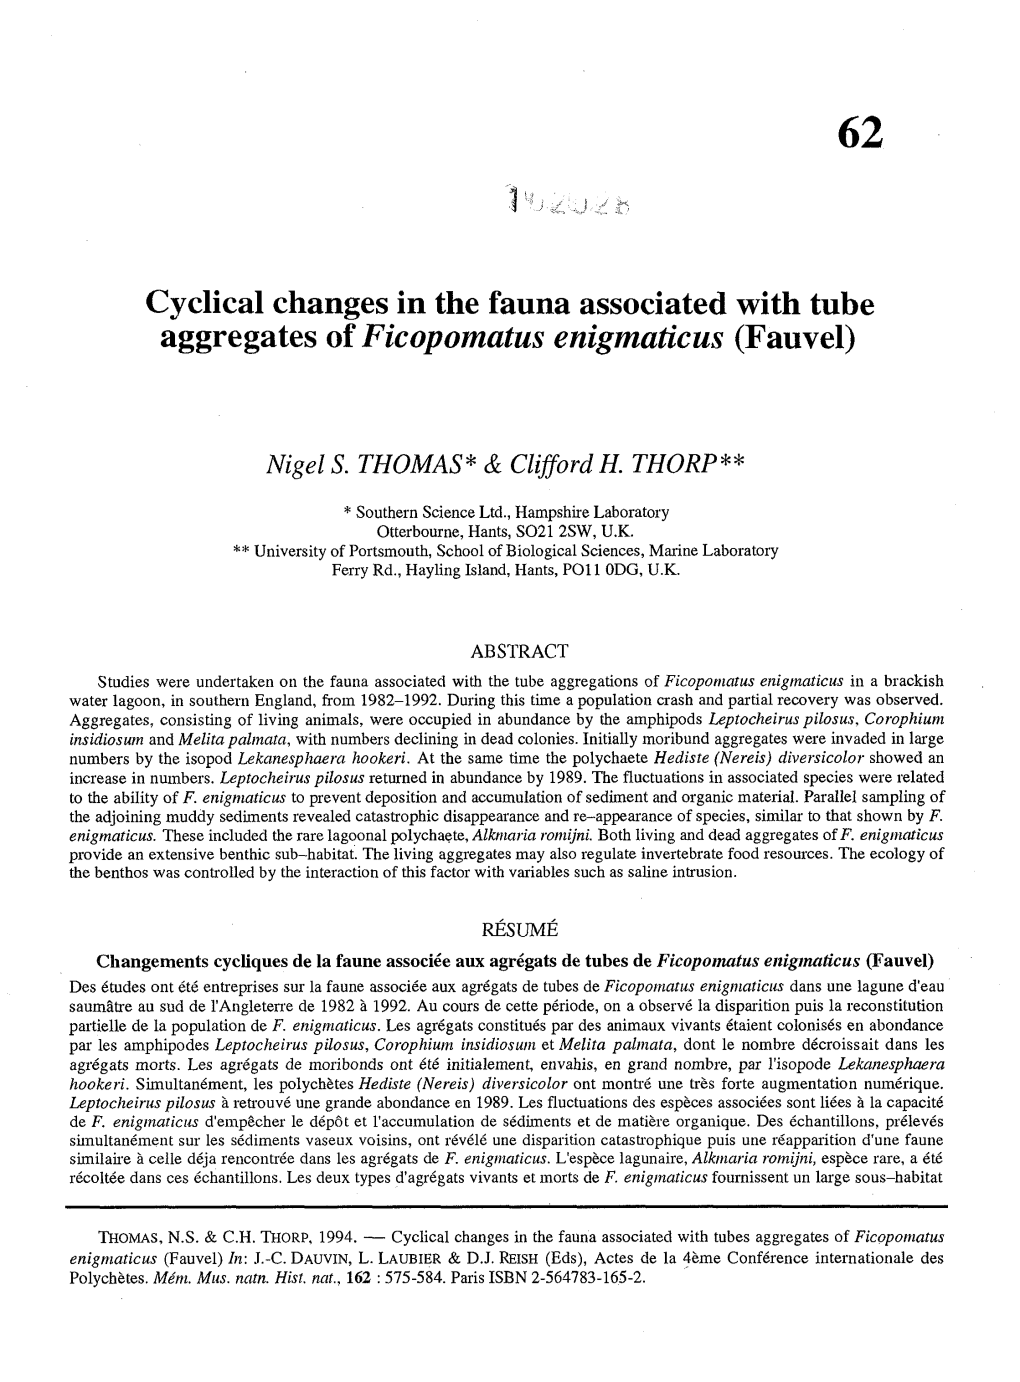 Cyclical Changes in the Fauna Associated with Tube Aggregates of Ficopomatus Enigmaticus (Fauvel)